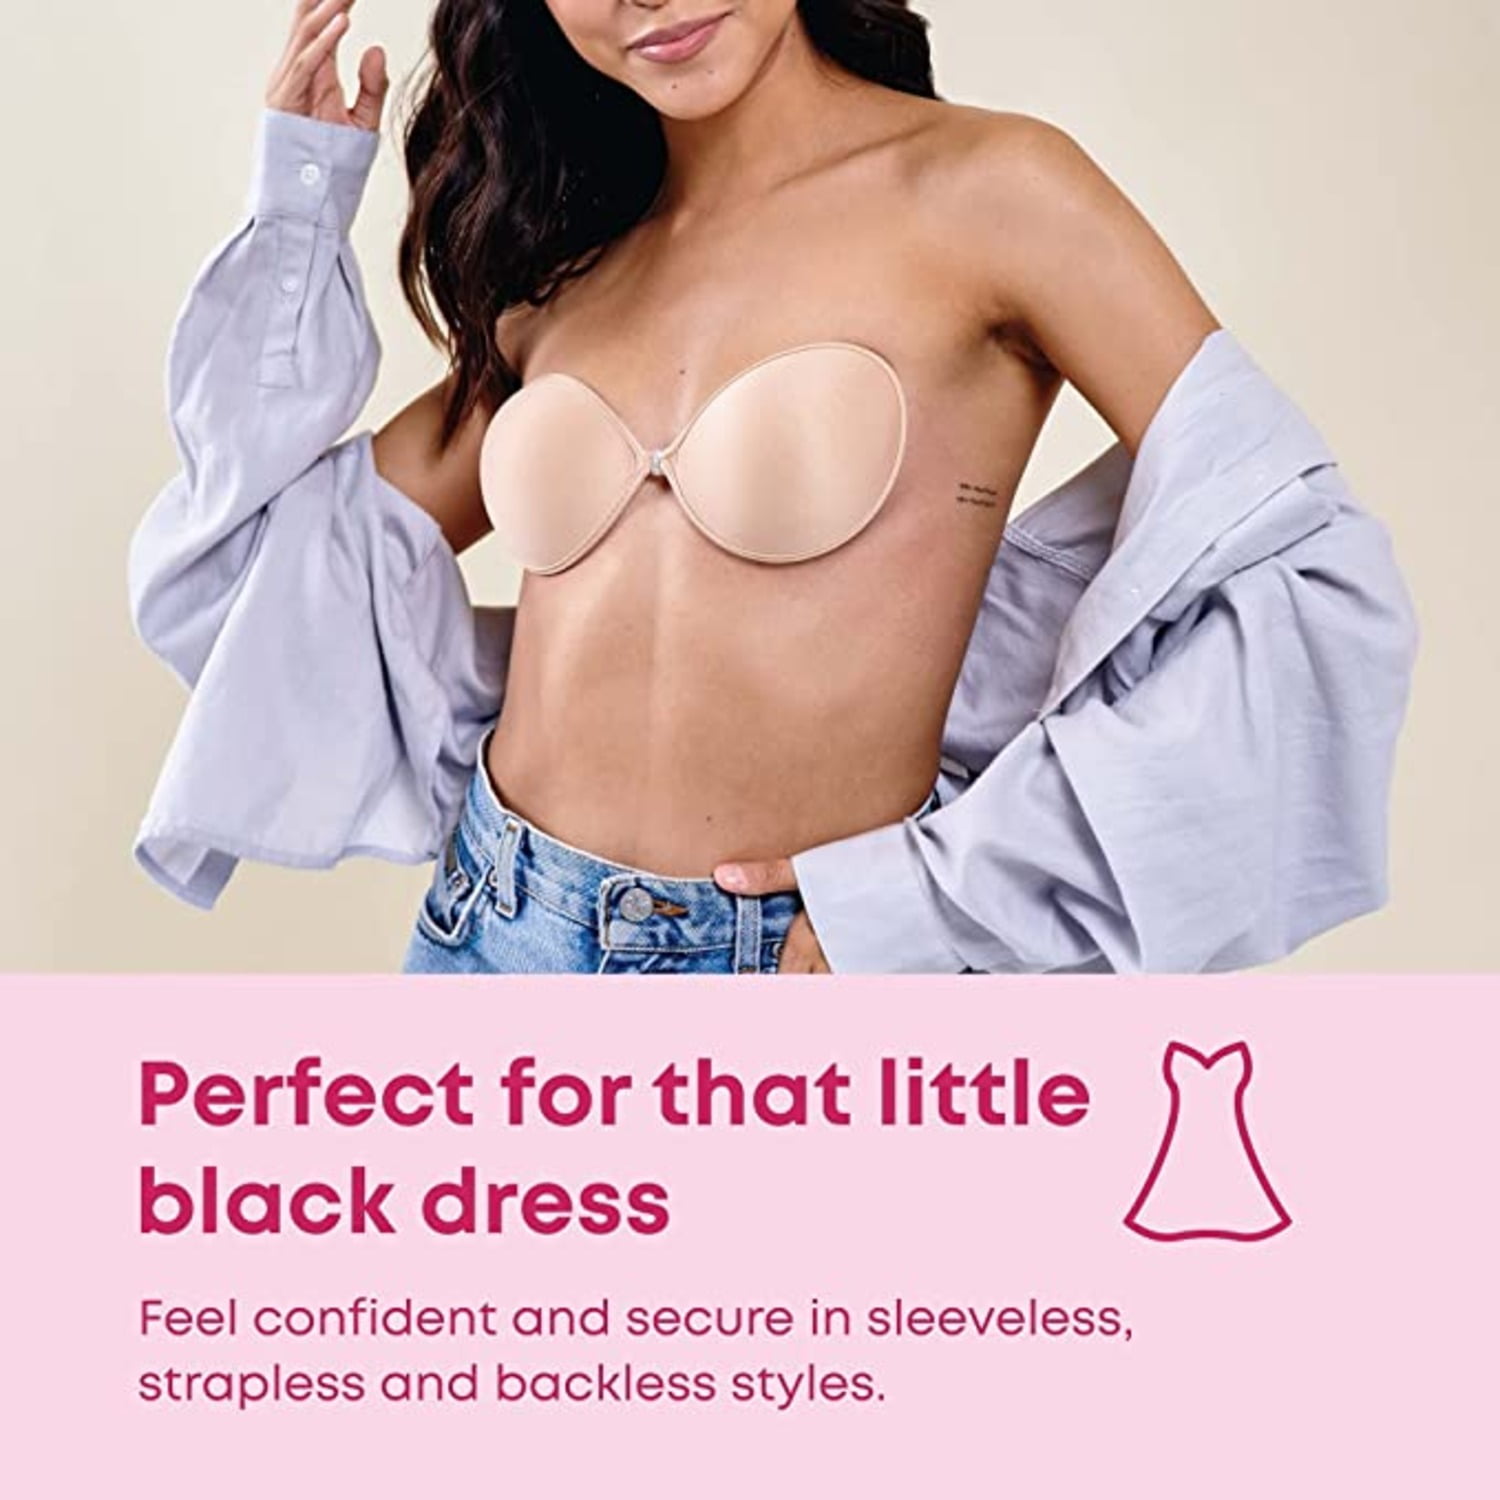 Risque Strapless Adhesive Bra - Backless with Reusable Silicone